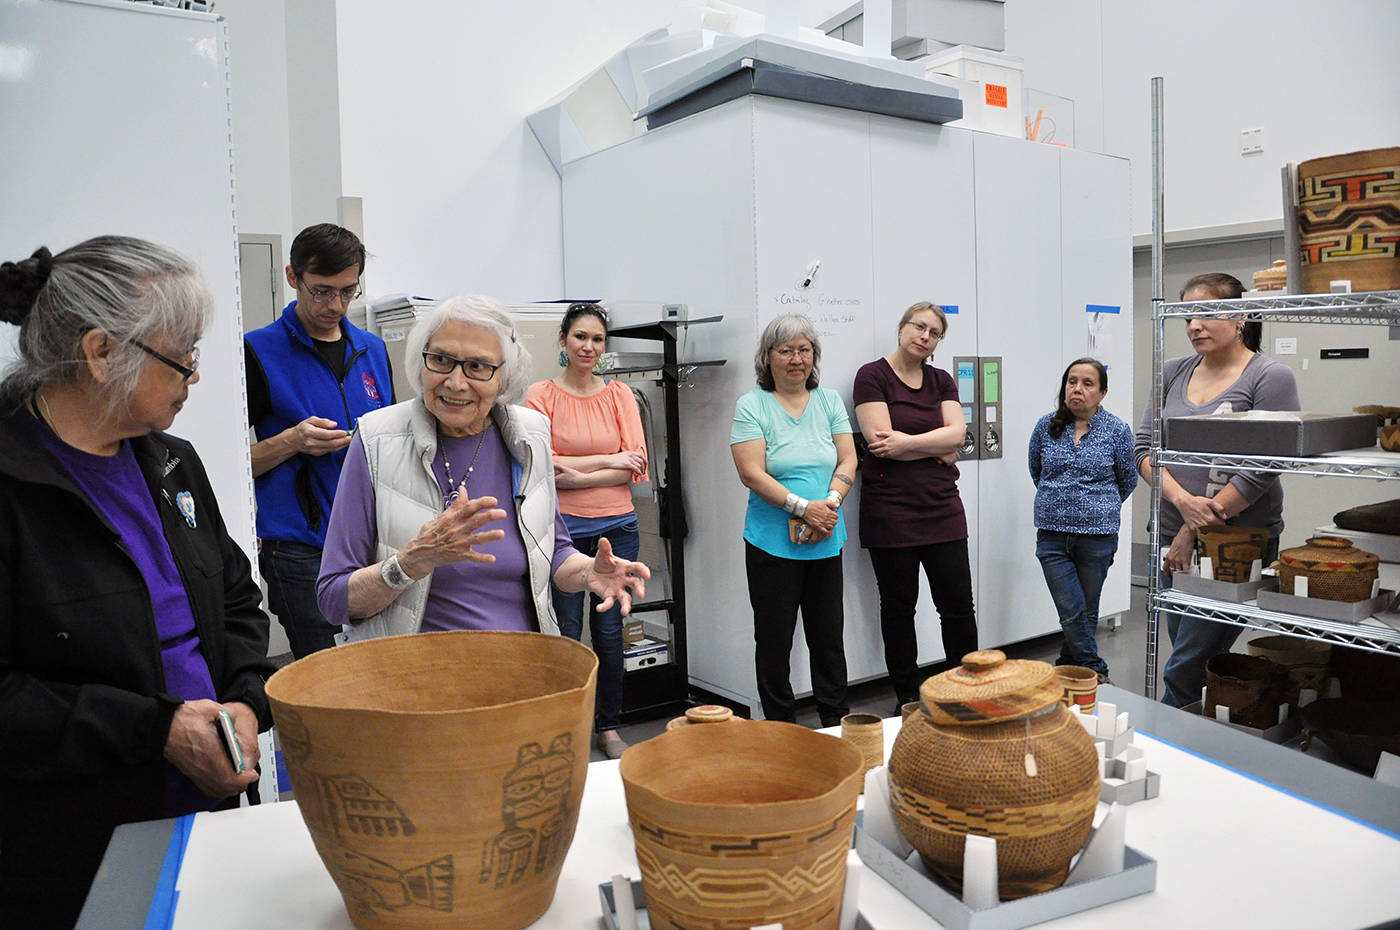 Master Haida weaver Delores Churchill, in the white vest, speaks about spruce root baskets. (Sealaska Heritage Institute | Courtesy Photo)